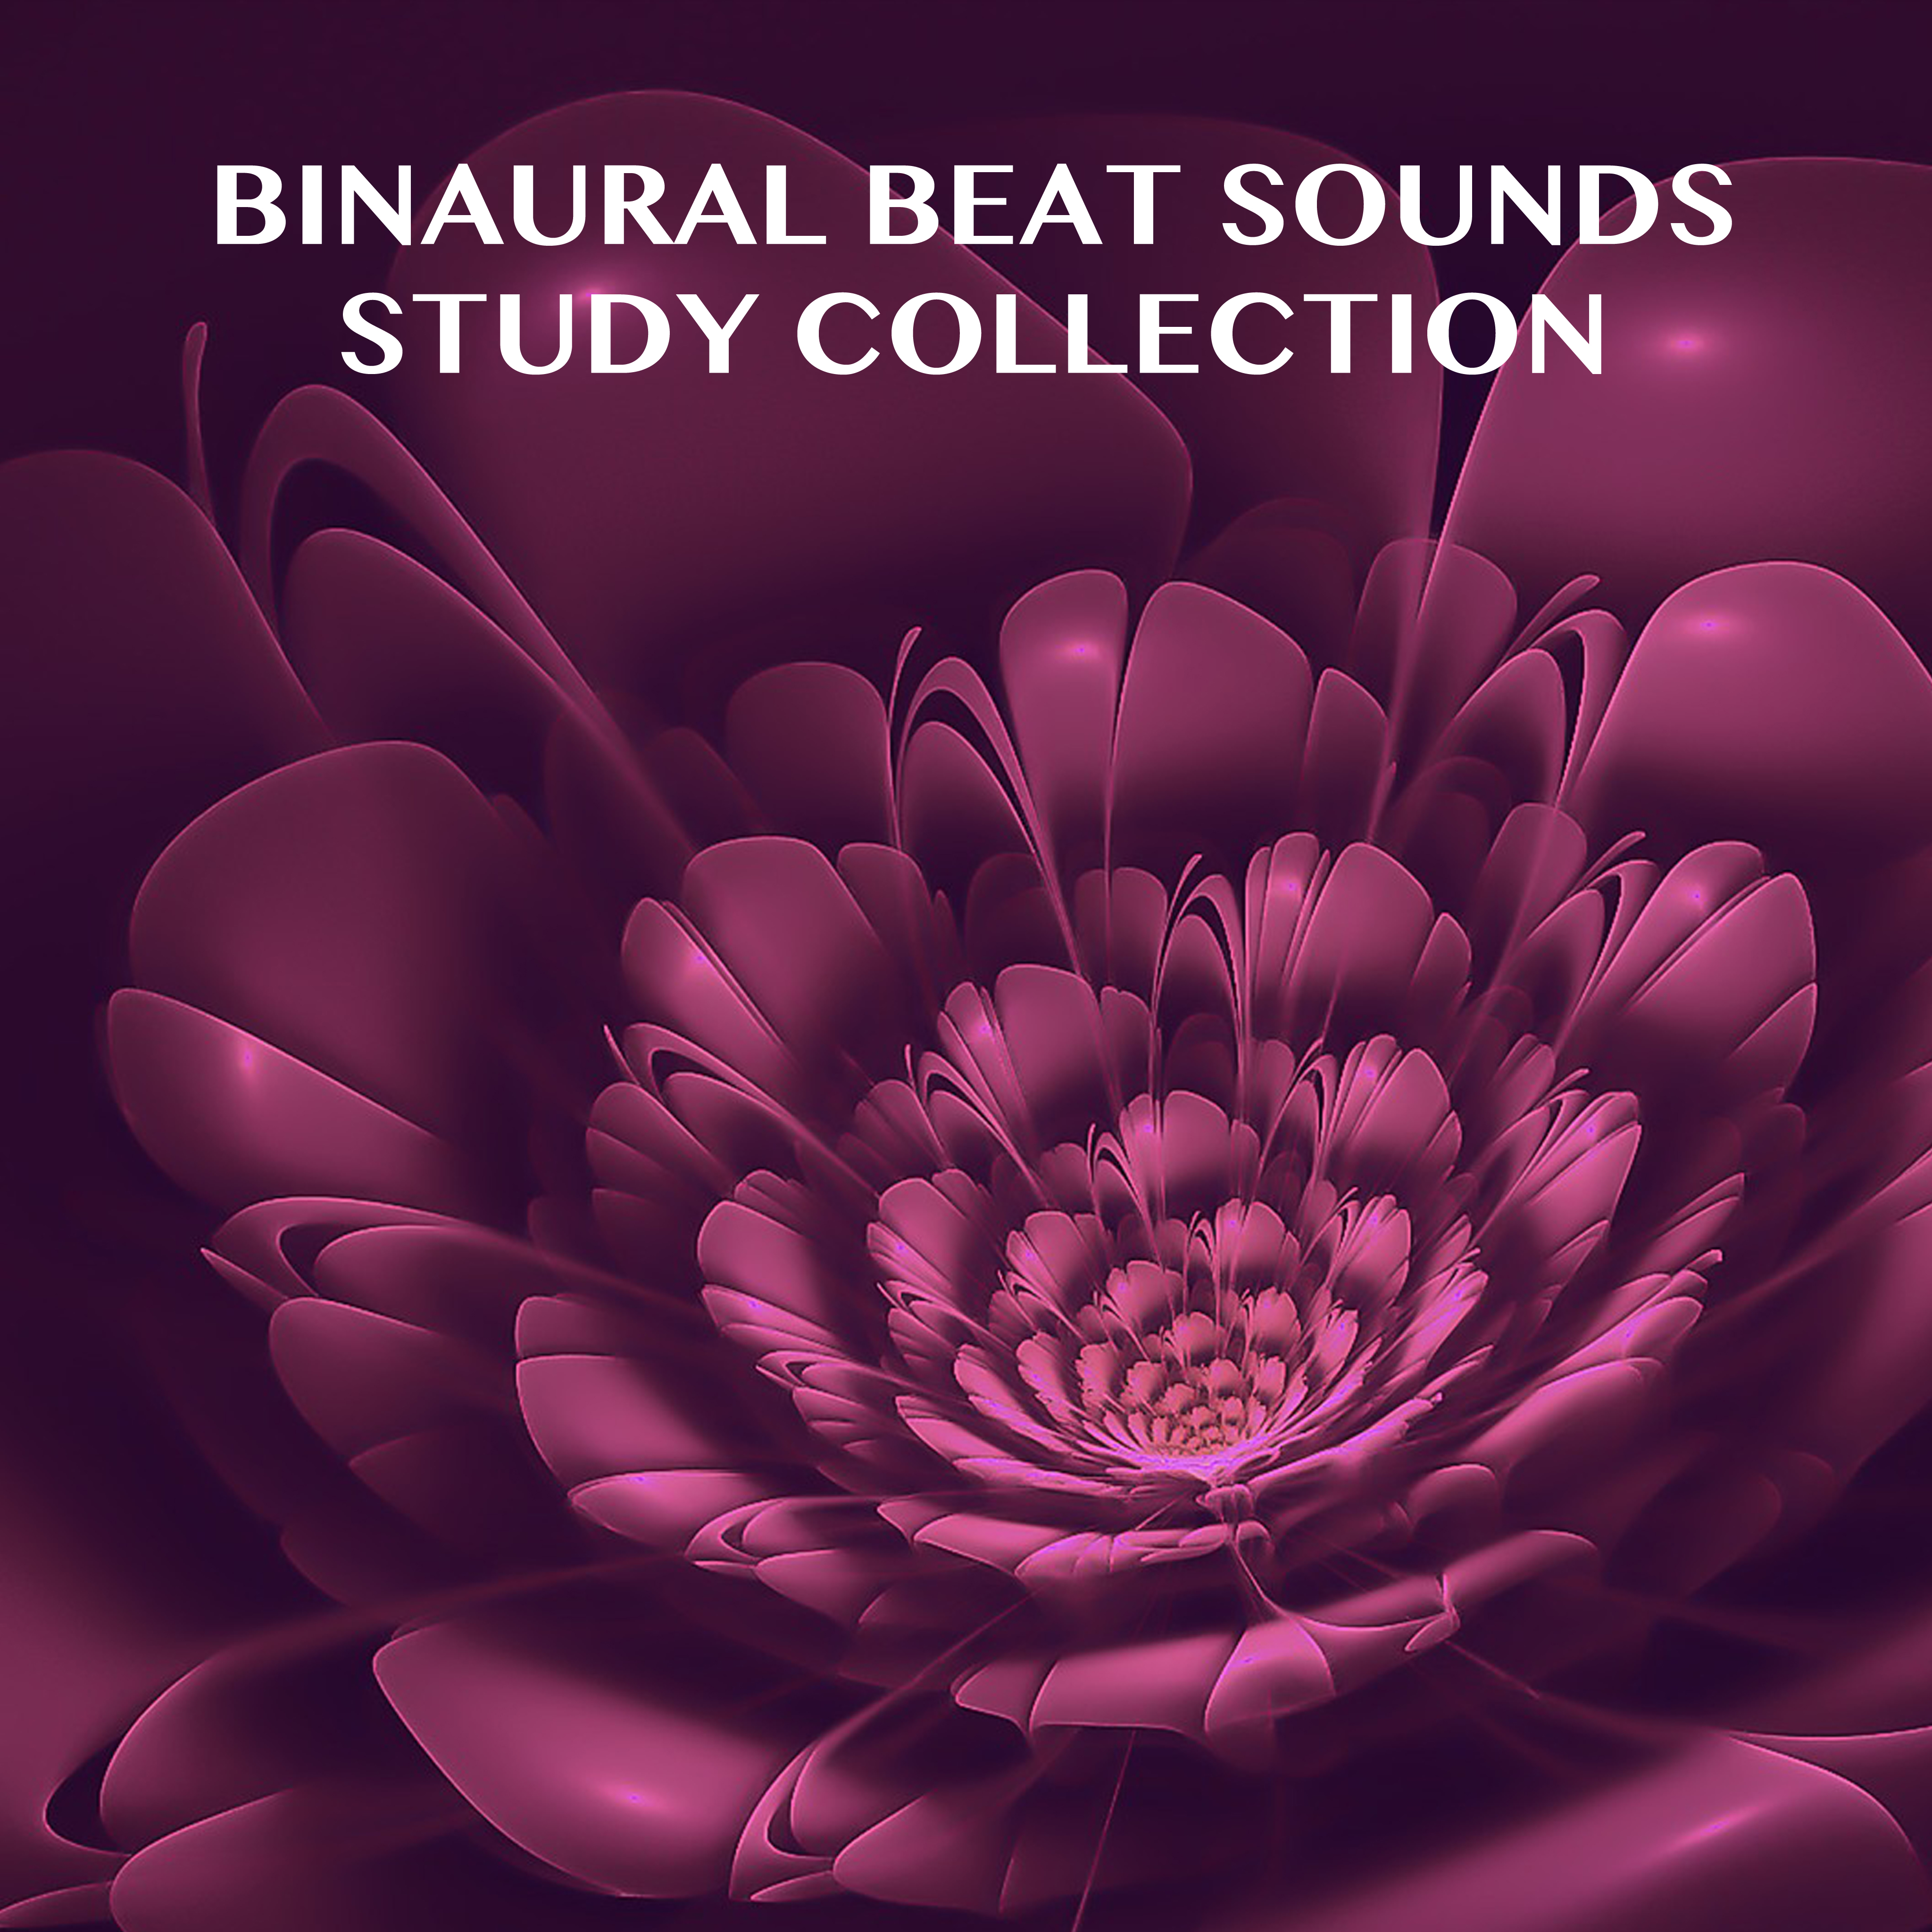 13 Binaural Beat Sounds - Study Collection